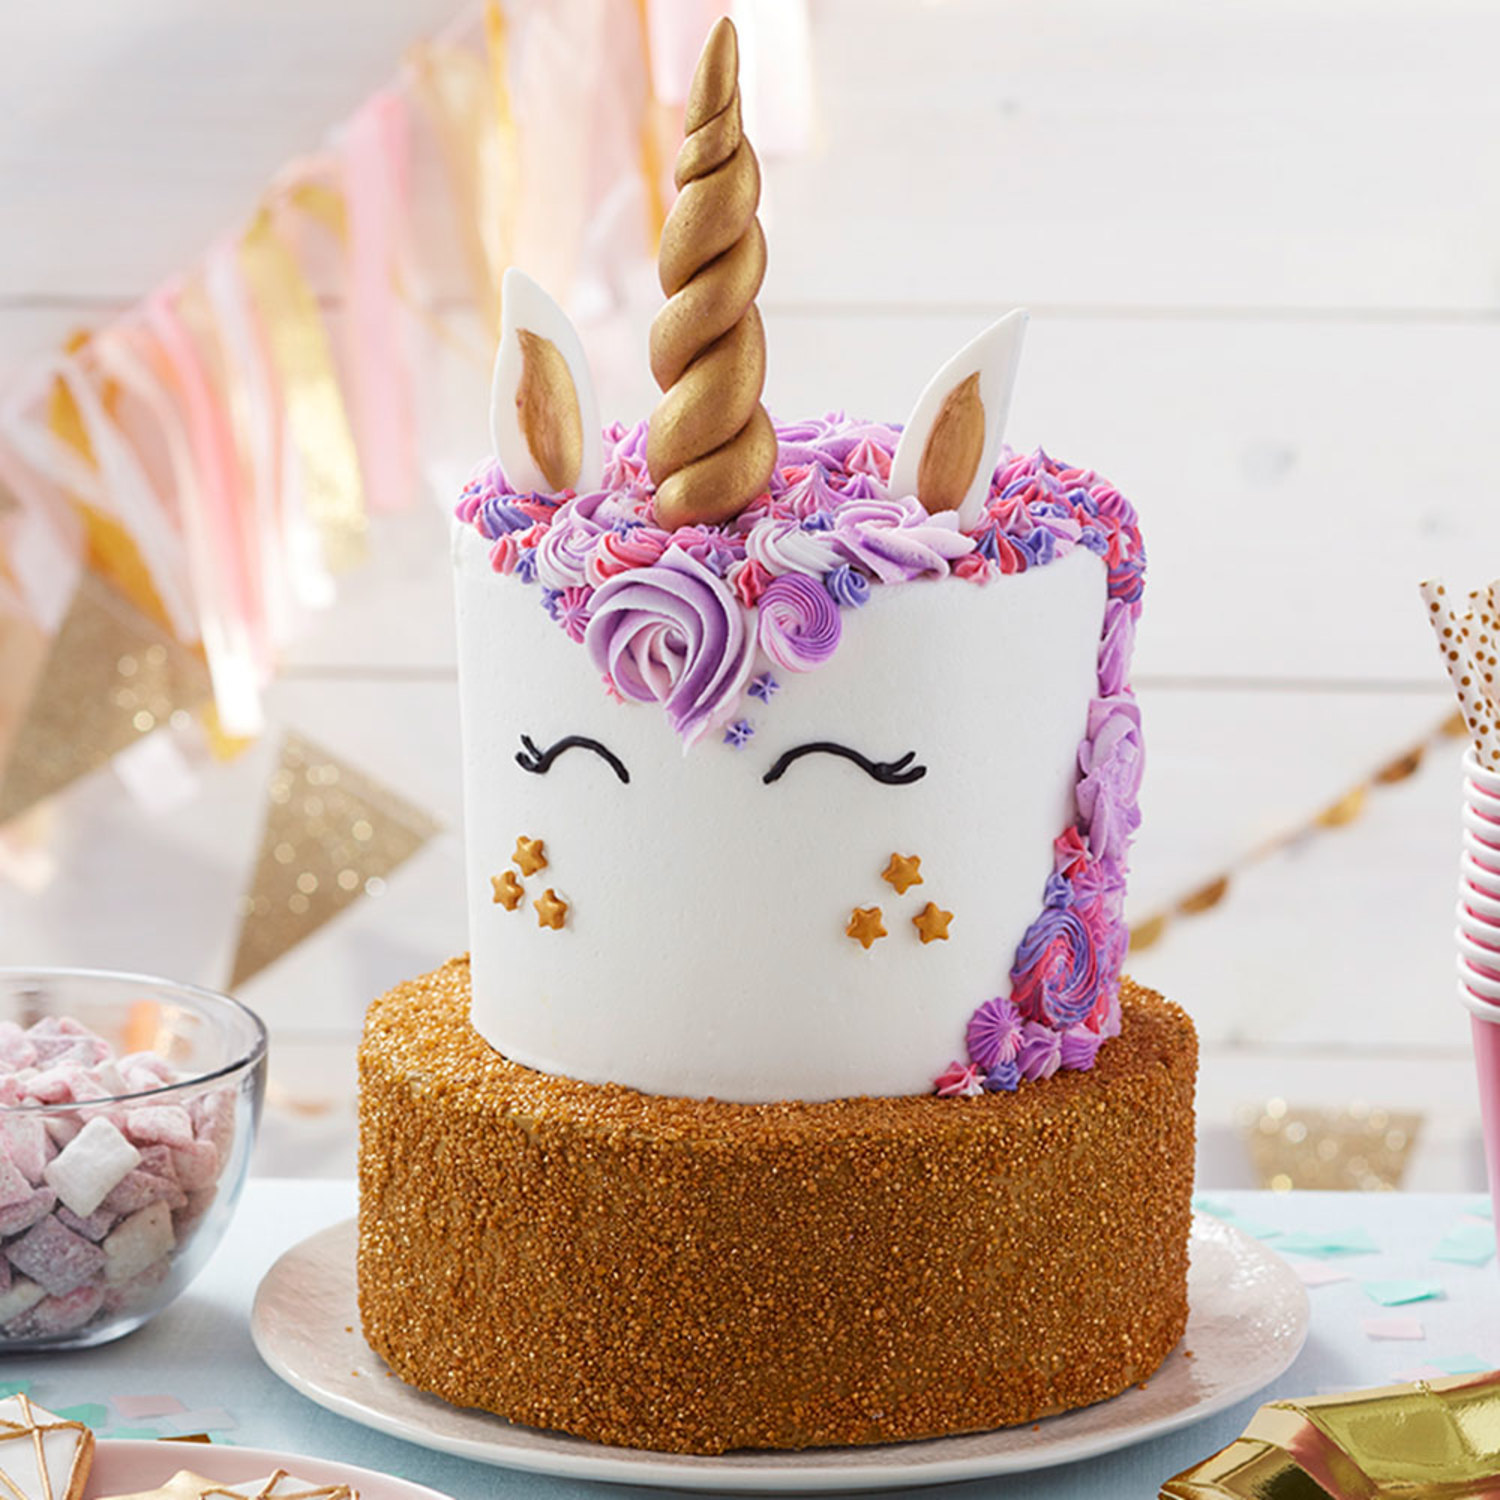 Beautiful Bright Cake Decorated In The Form Of Fantasy Unicorn Concept Of A  Festive Dessert For Kids Birthday Stock Photo - Download Image Now - iStock